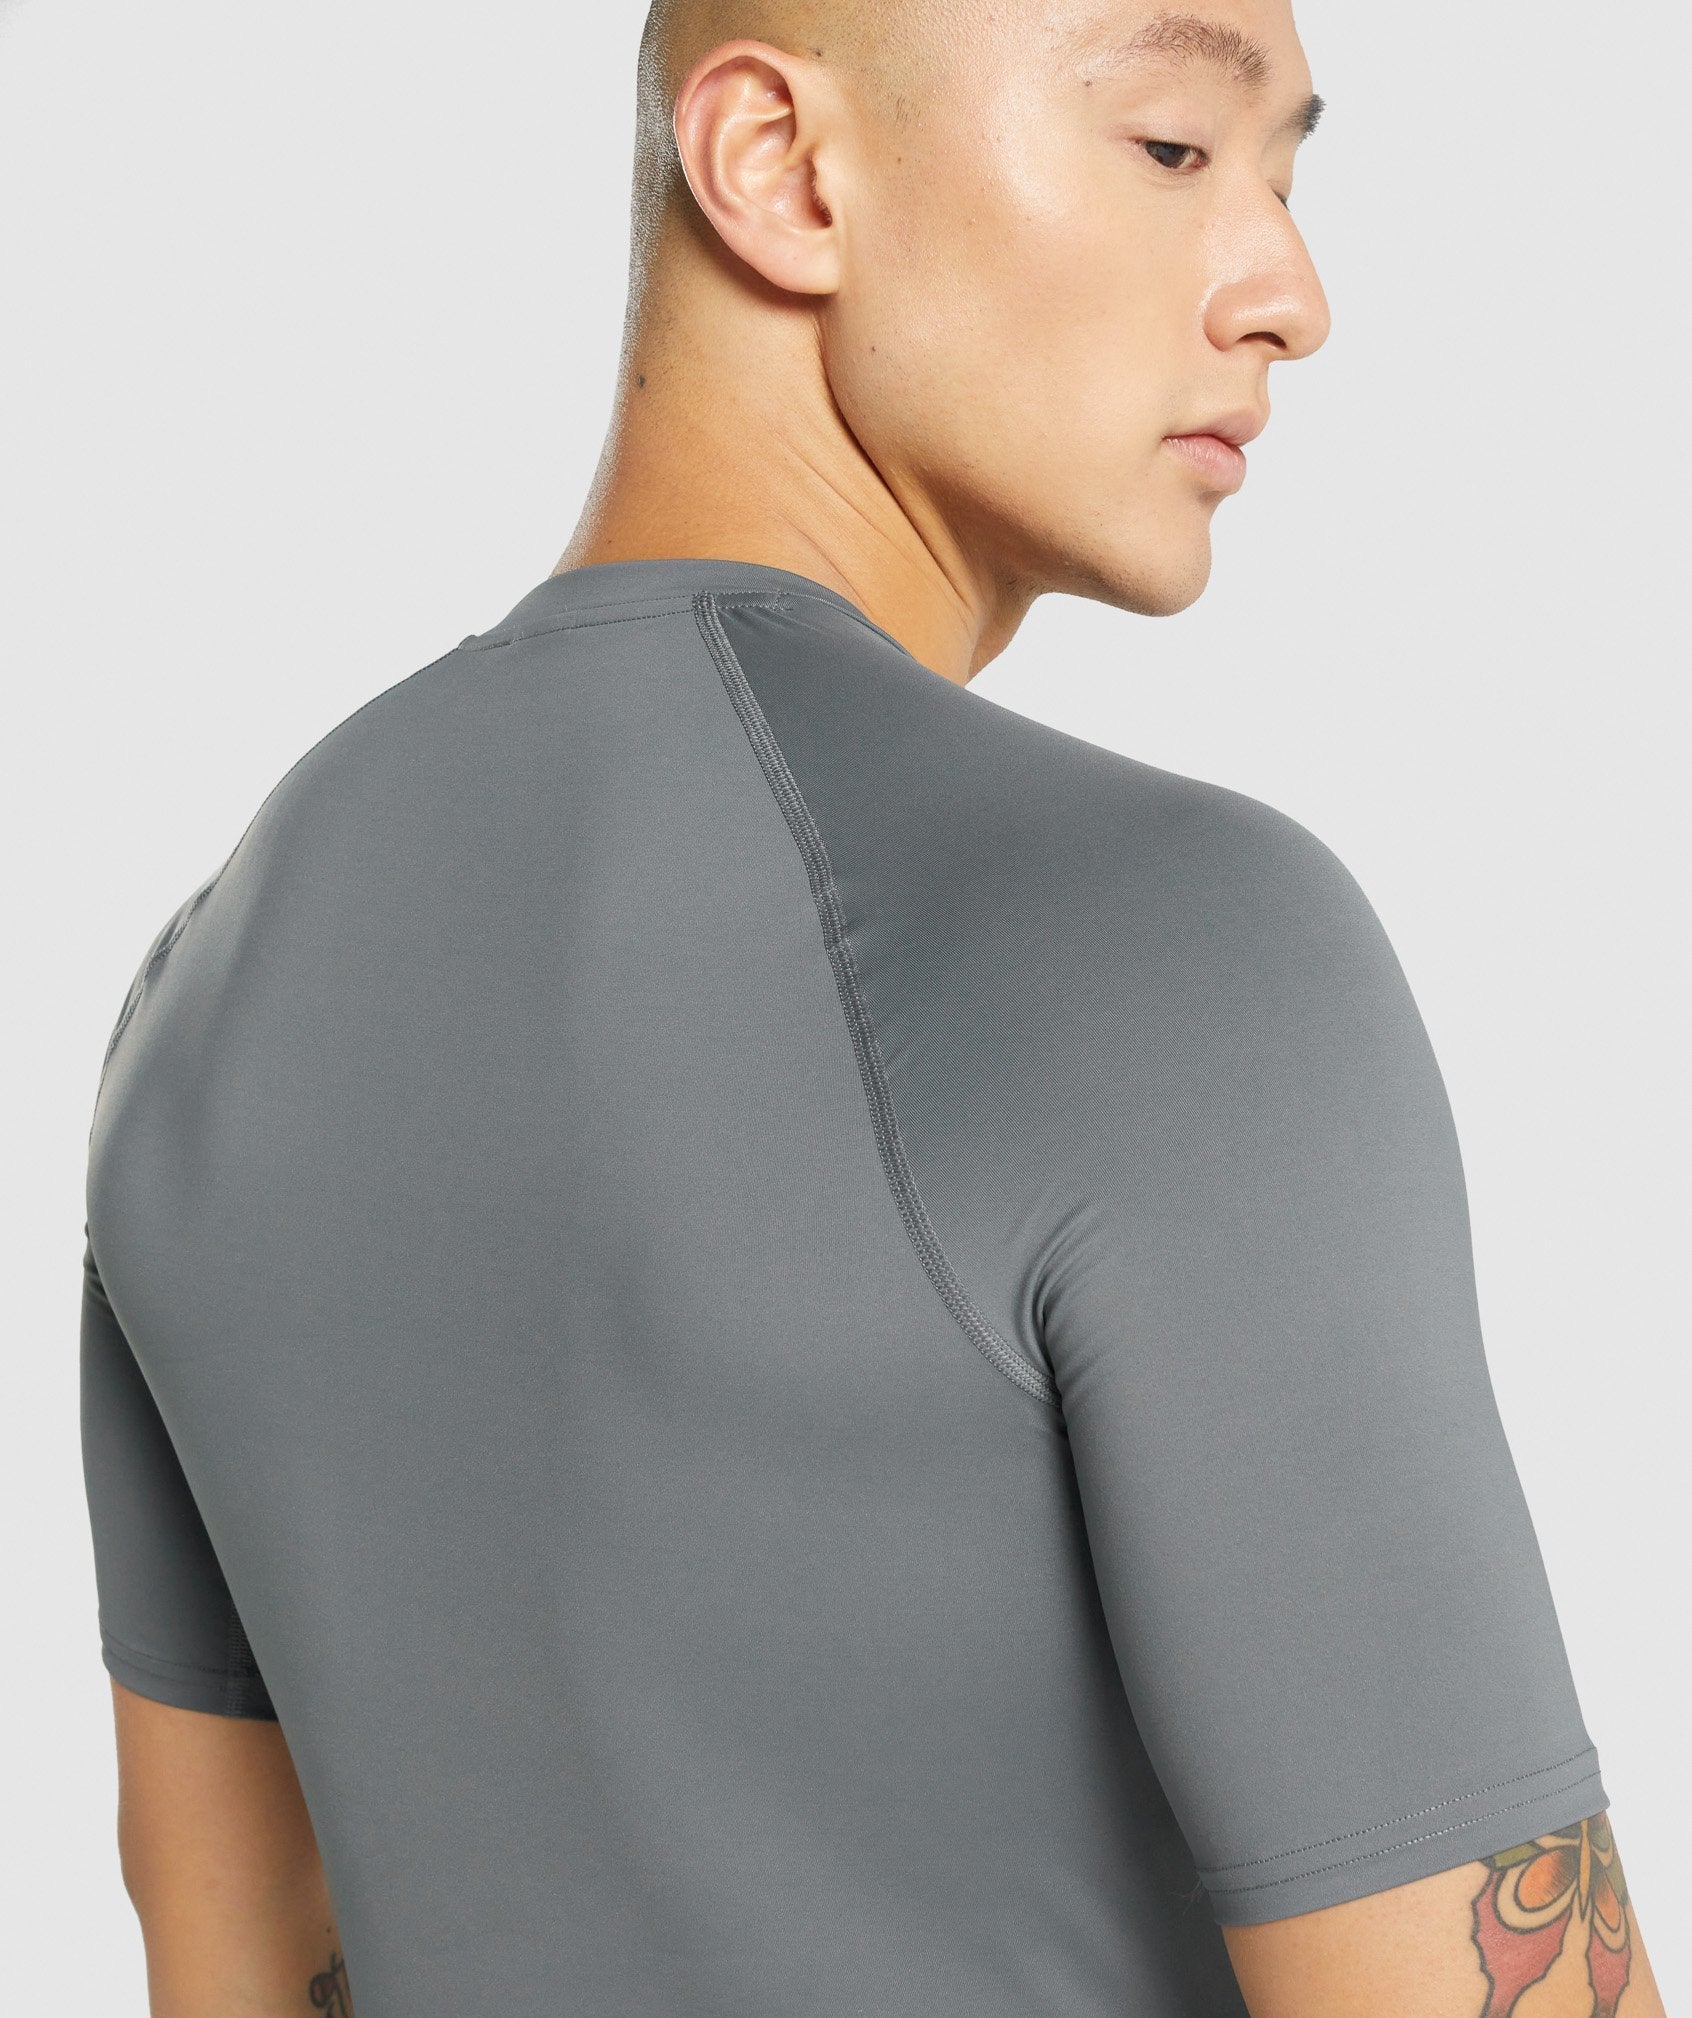 Element Baselayer T-Shirt in Charcoal